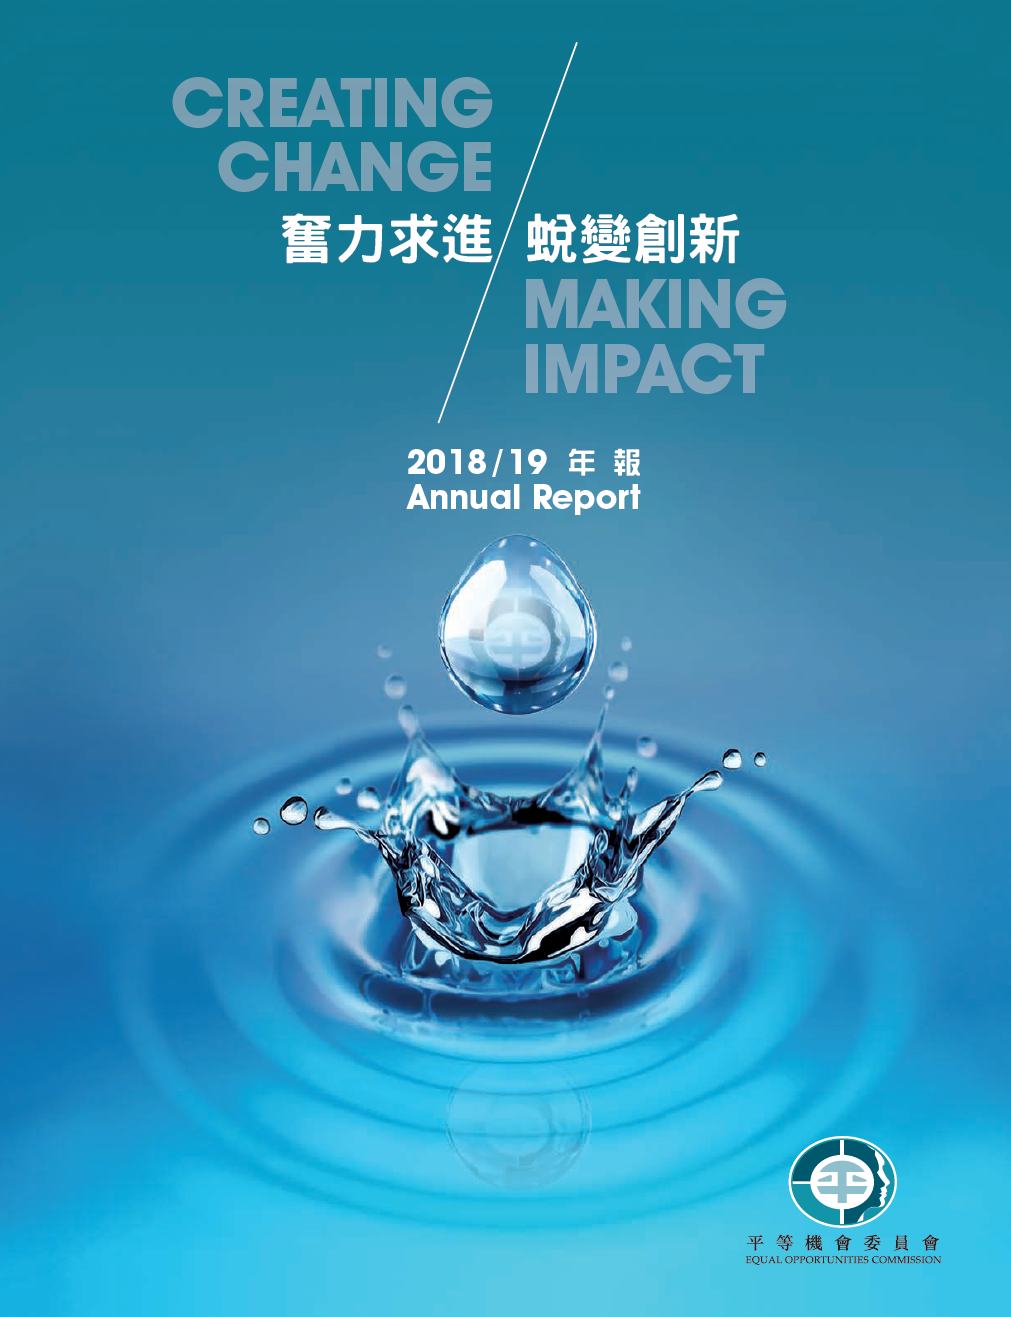 Cover of the annual report, featuring a crystal-clear drop of water falling into a pond. The EOC logo is reflected in the water drop.